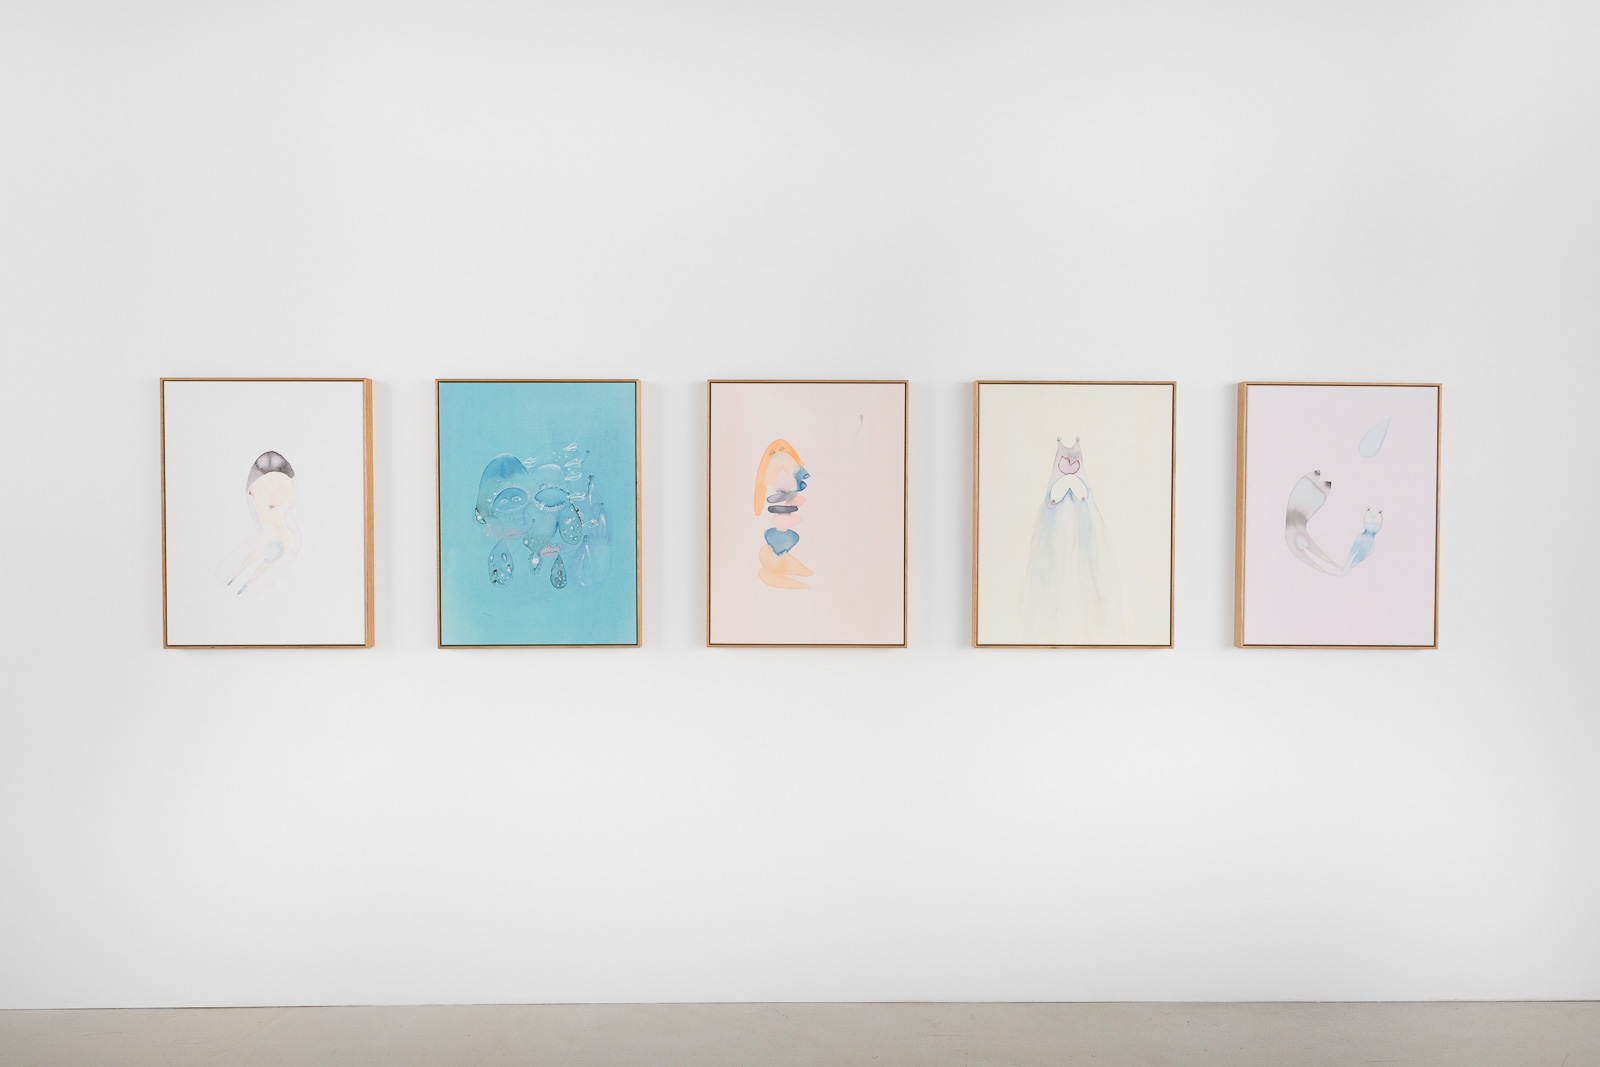 Tara Marynowsky: (5 works pictured from left to right): 'Marshmallow', 'Brain Rain', 'Goldie', 'Rain Man', 'Planet Claire'